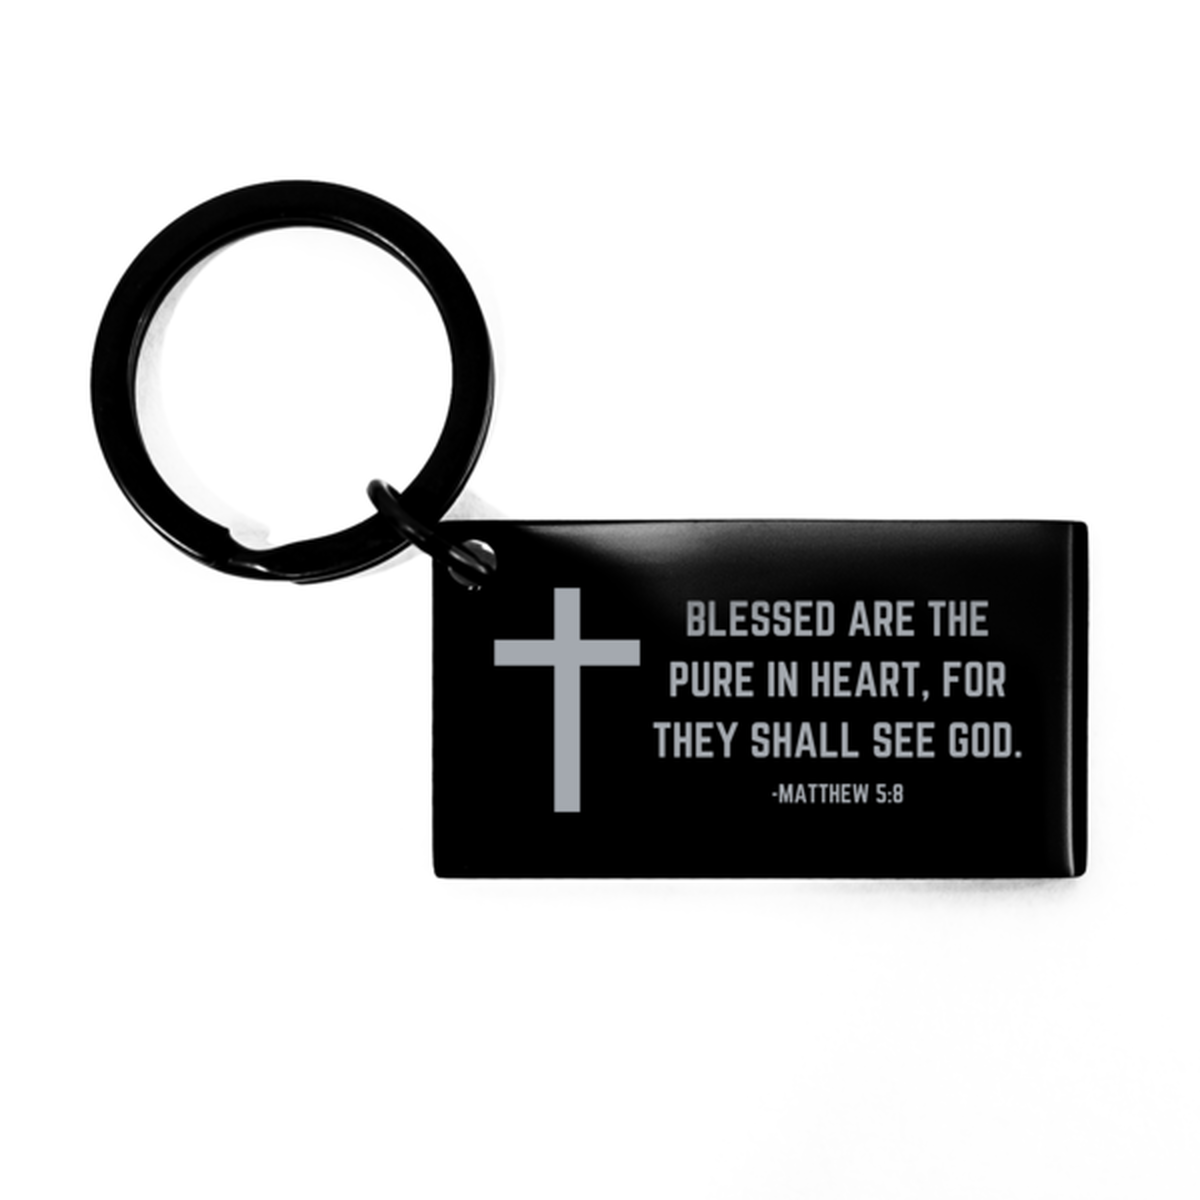 Baptism Gifts For Teenage Boys Girls, Christian Bible Verse Black Keychain, Blessed are the pure in heart, Confirmation Gifts, Bible Verse Keyring for Son, Godson, Grandson, Nephew